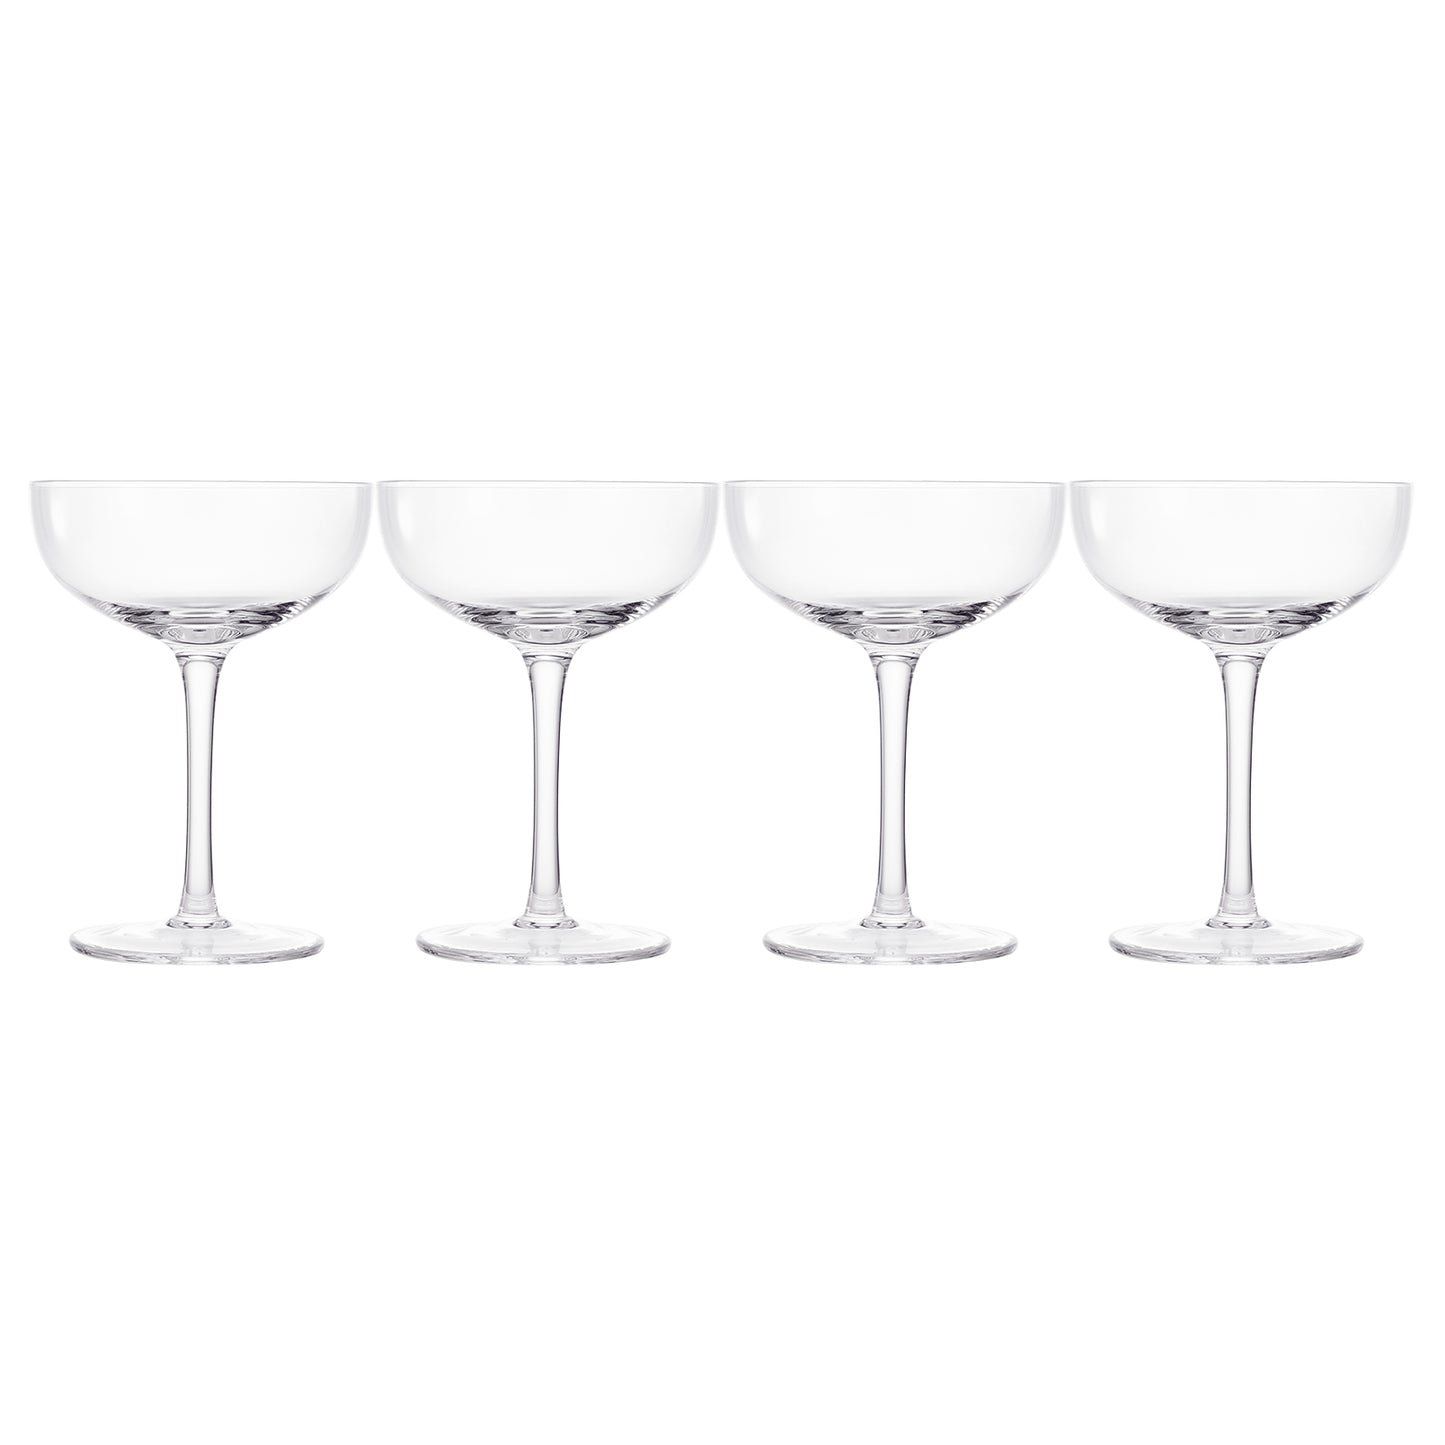 Classica Coupe Cocktail Glassware, Set of 4